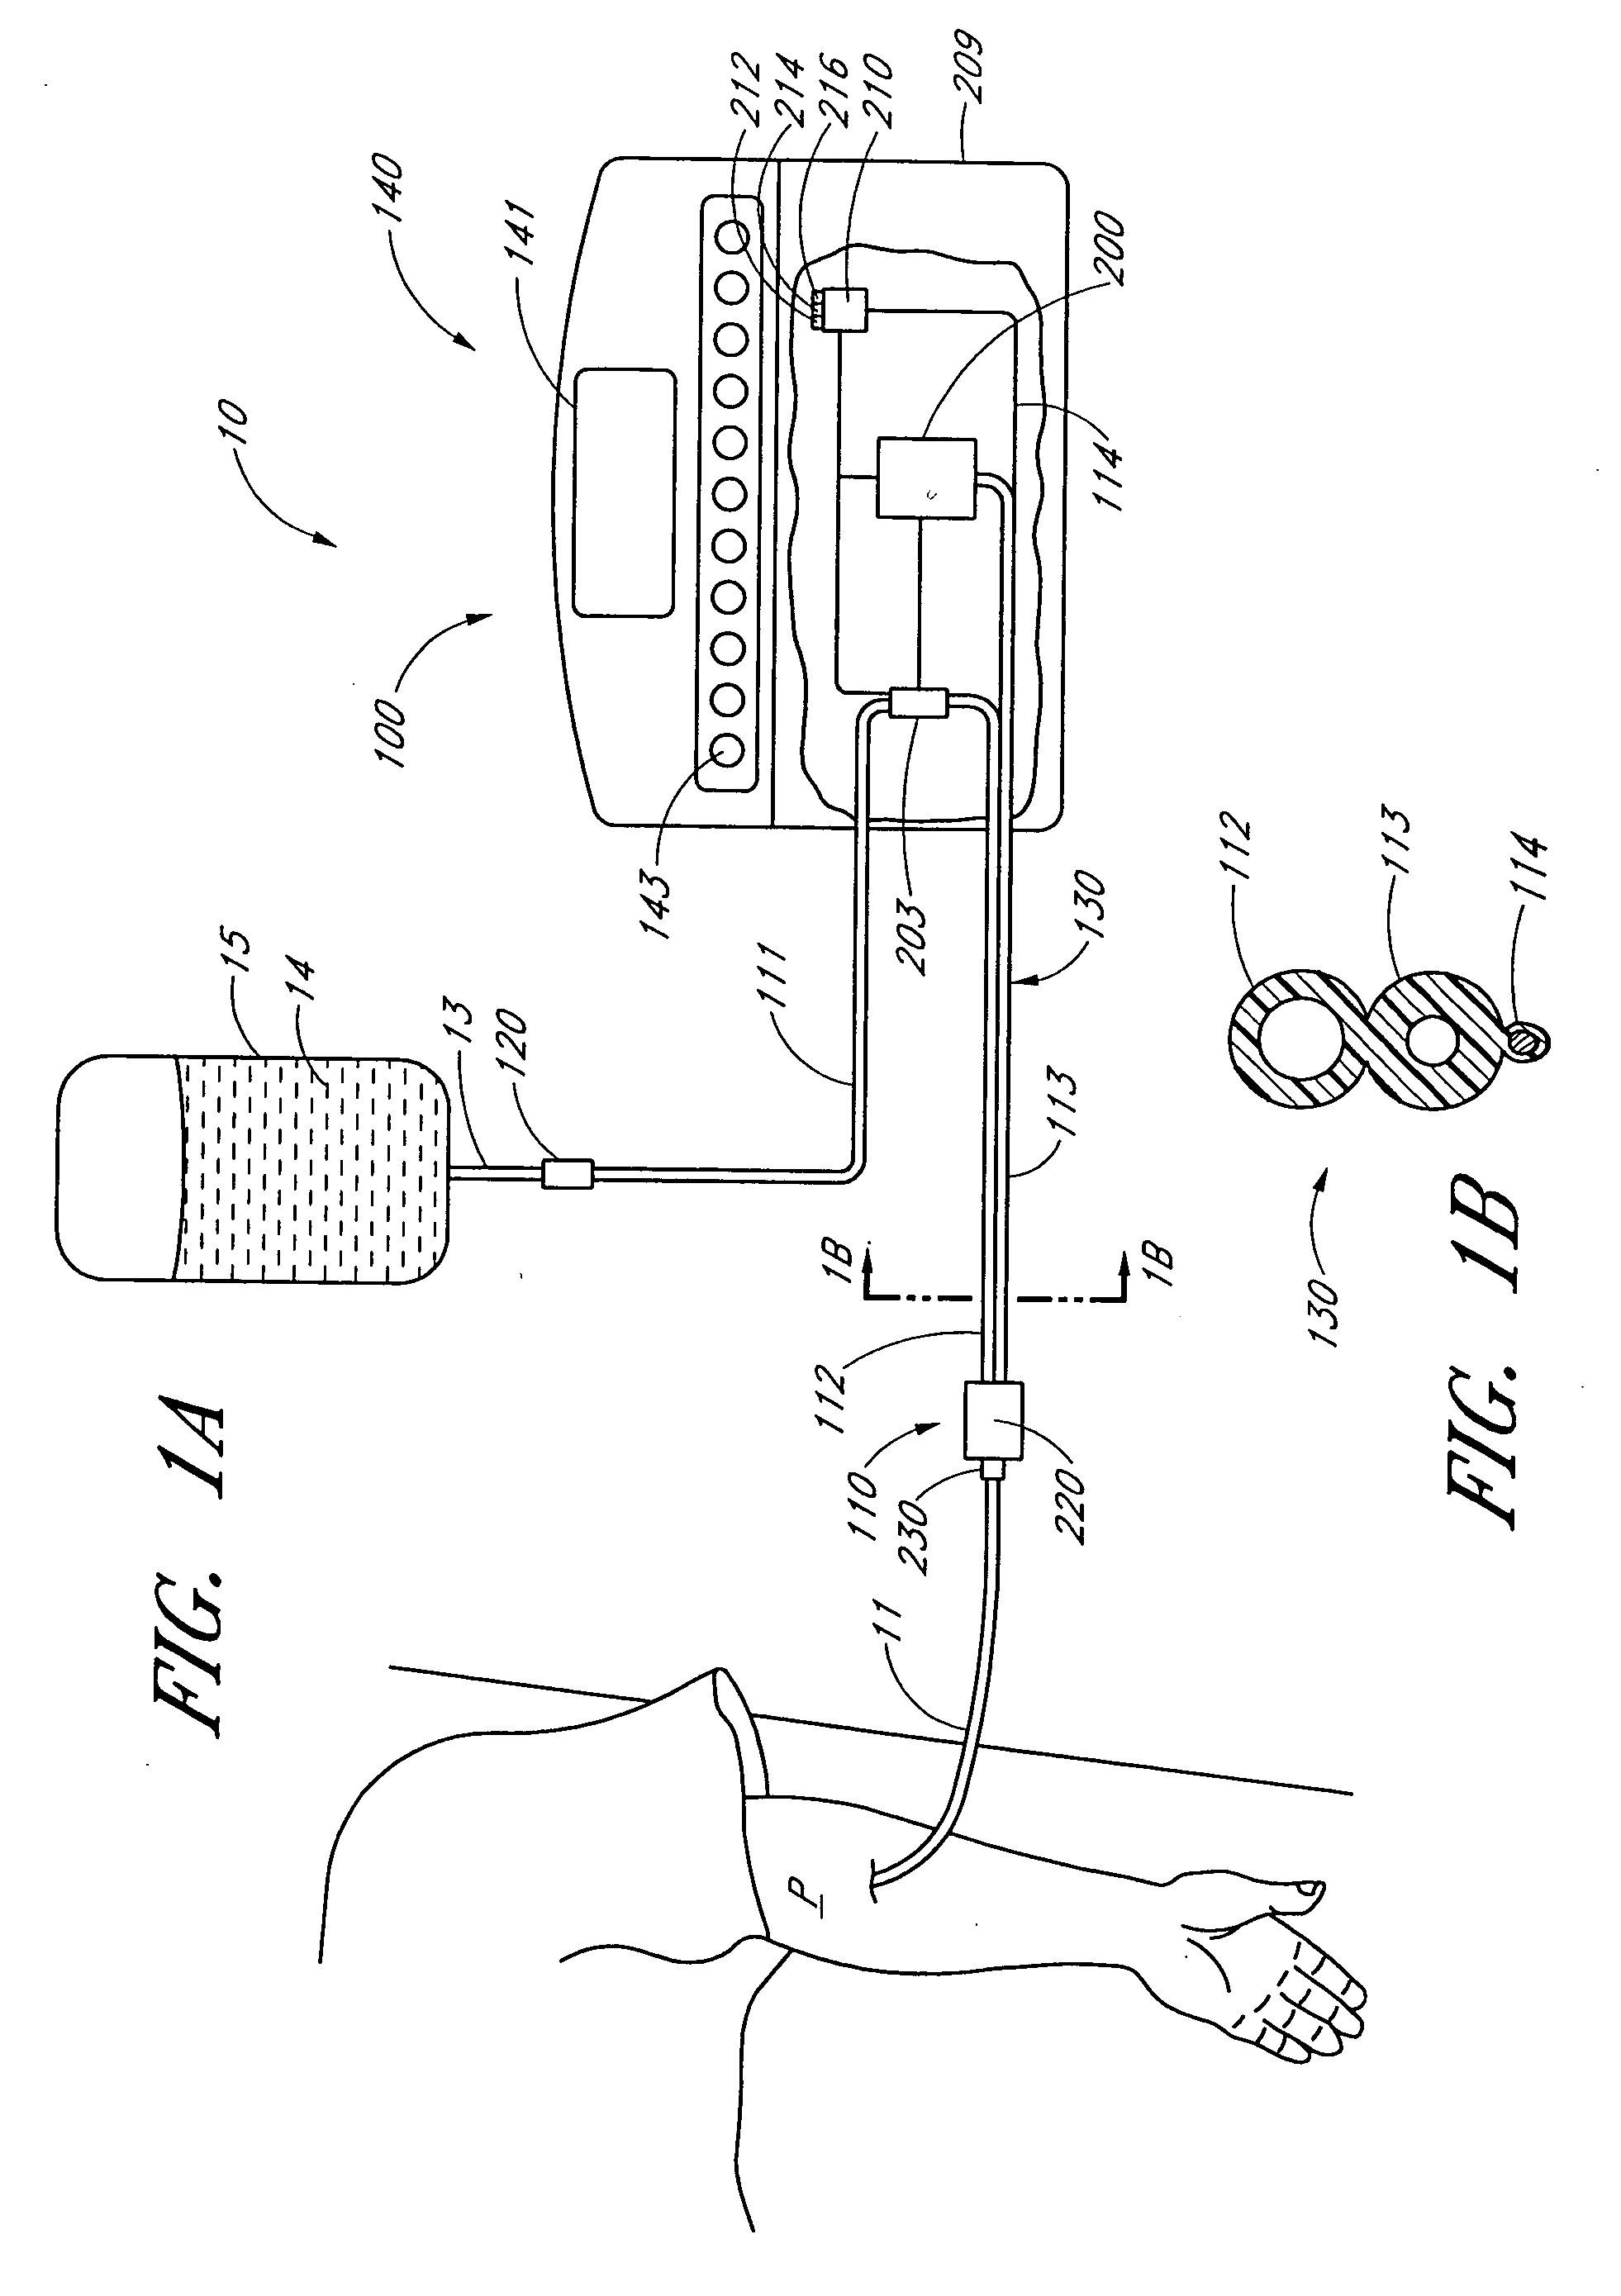 Analyte detection system with reduced sample volume